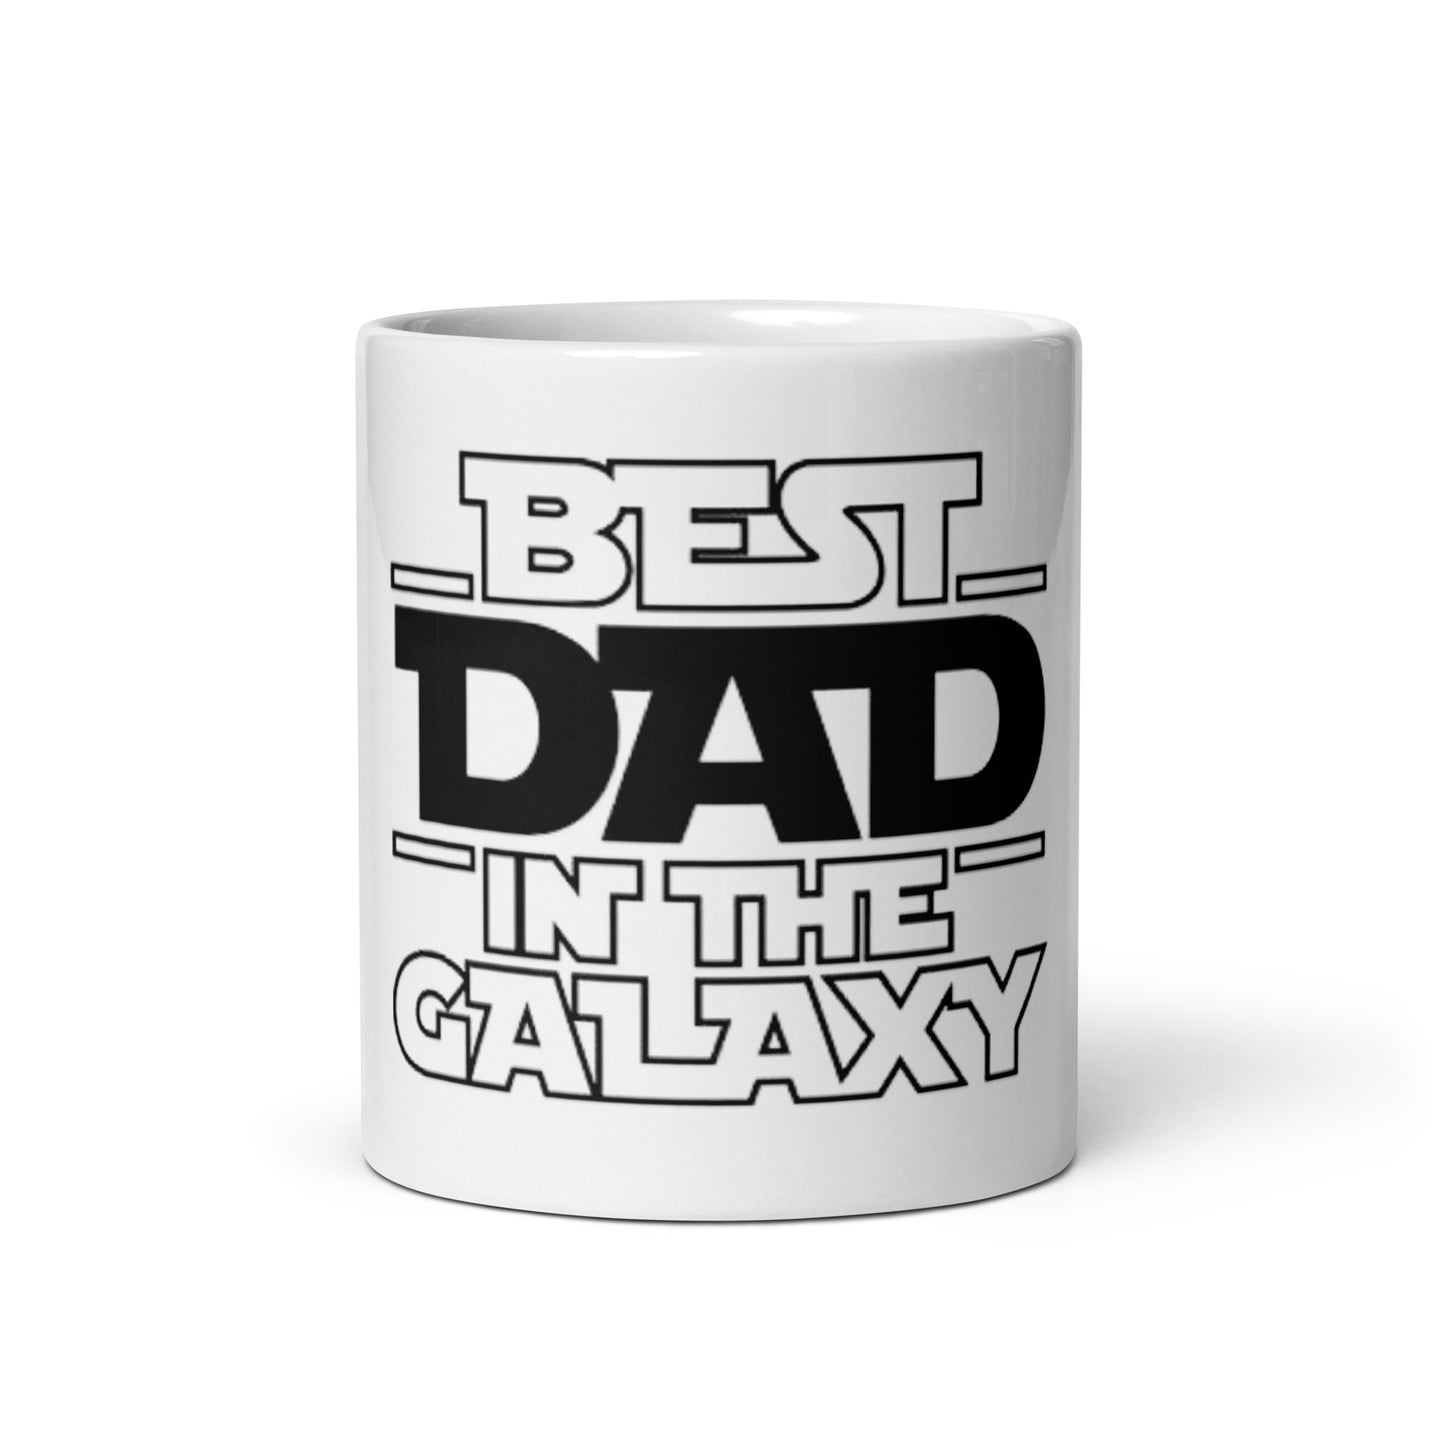 Best Dad in the Galaxy Cup